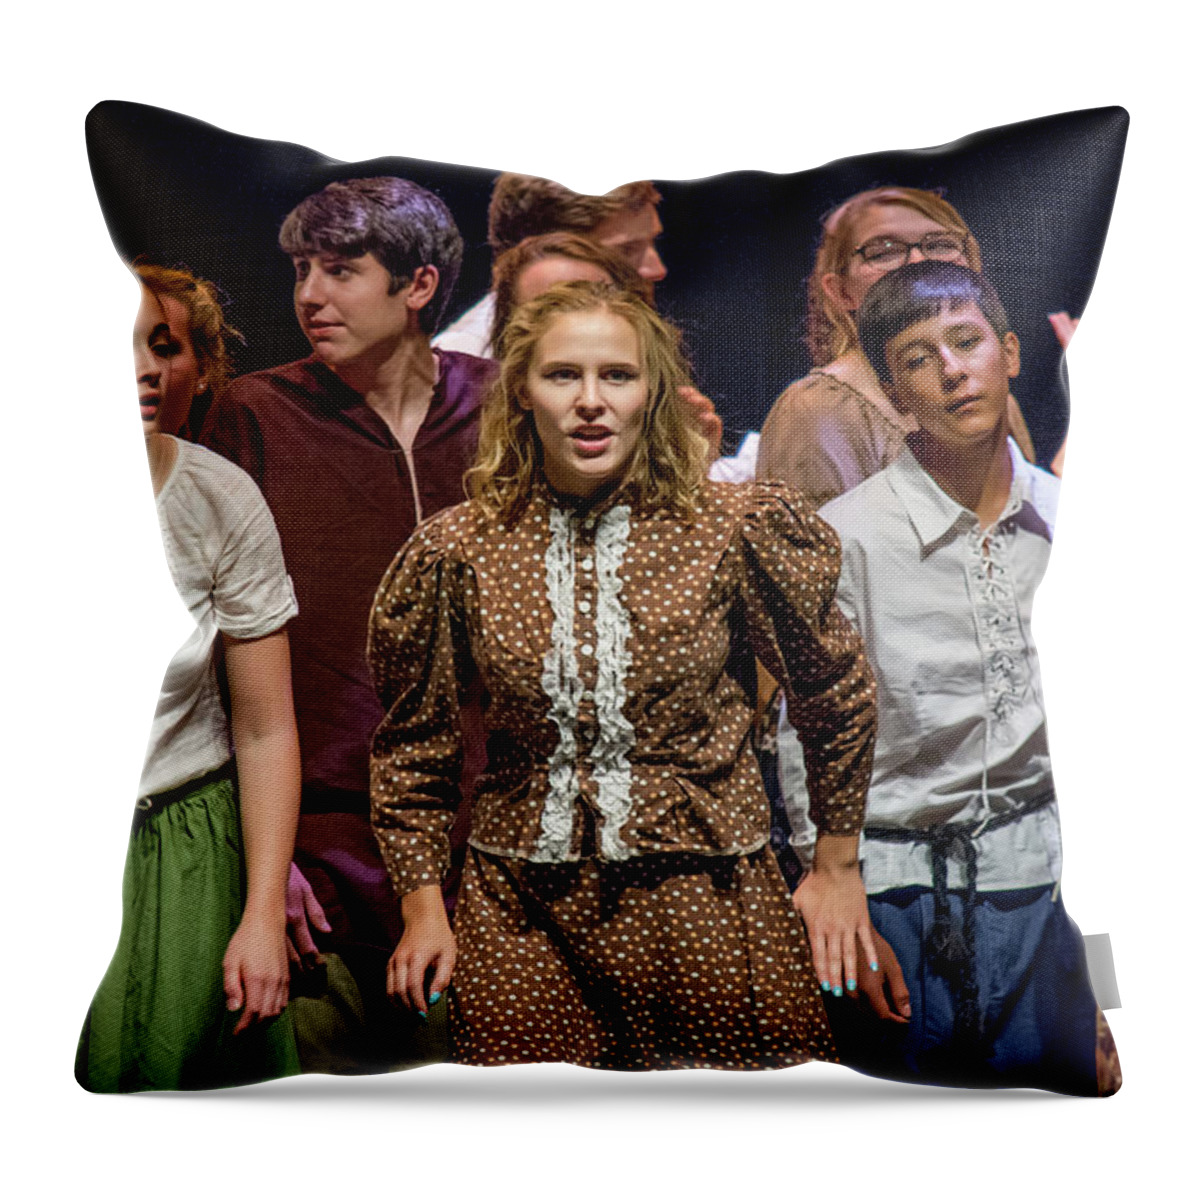 From The Totem Pole High School Production Awards. Throw Pillow featuring the photograph Tpa014 by Andy Smetzer